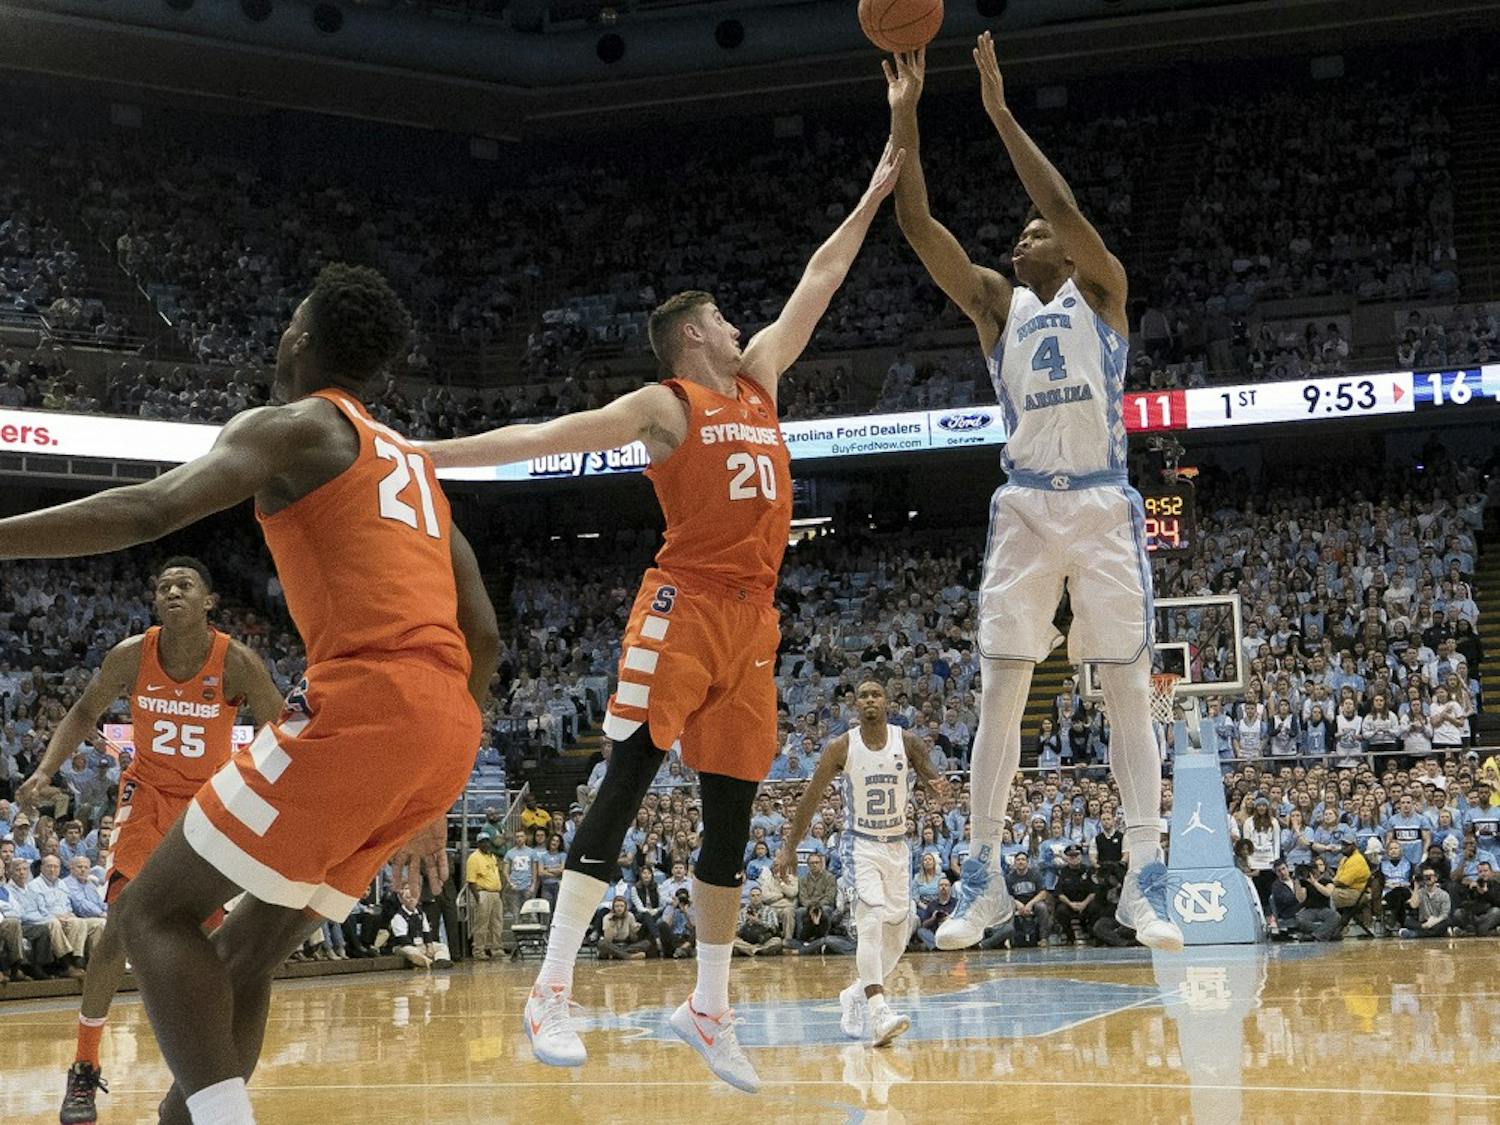 North Carolina forward Isaiah Hicks (4) shoots over a Syracuse defender. Syracuse is known for running a zone defense.